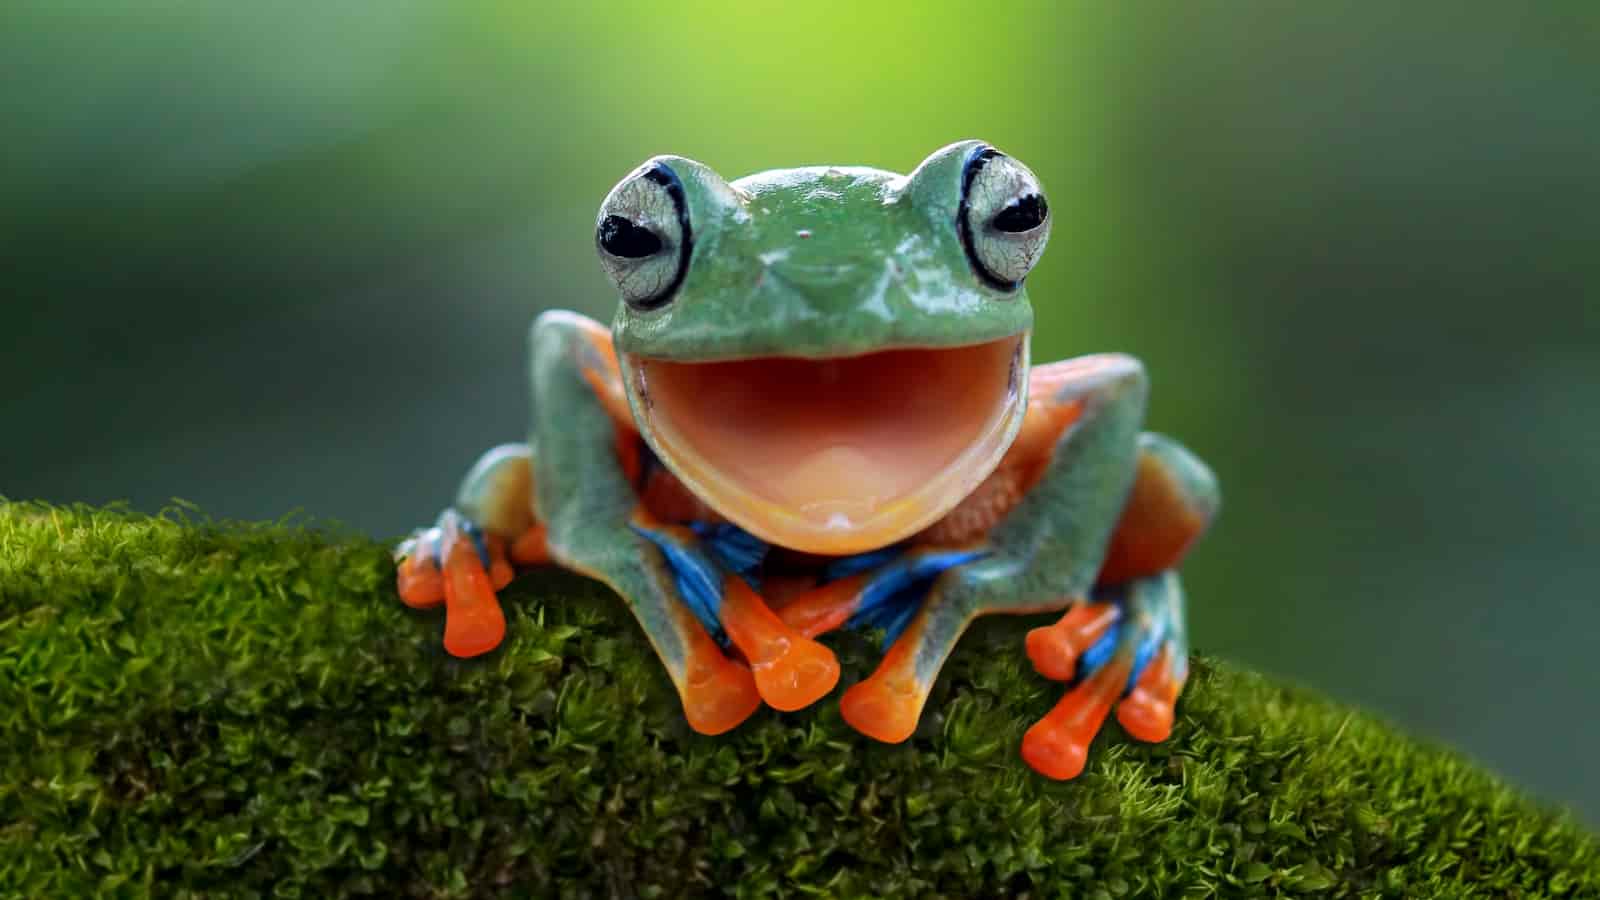 American Frog Day Quotes, Wishes And Message